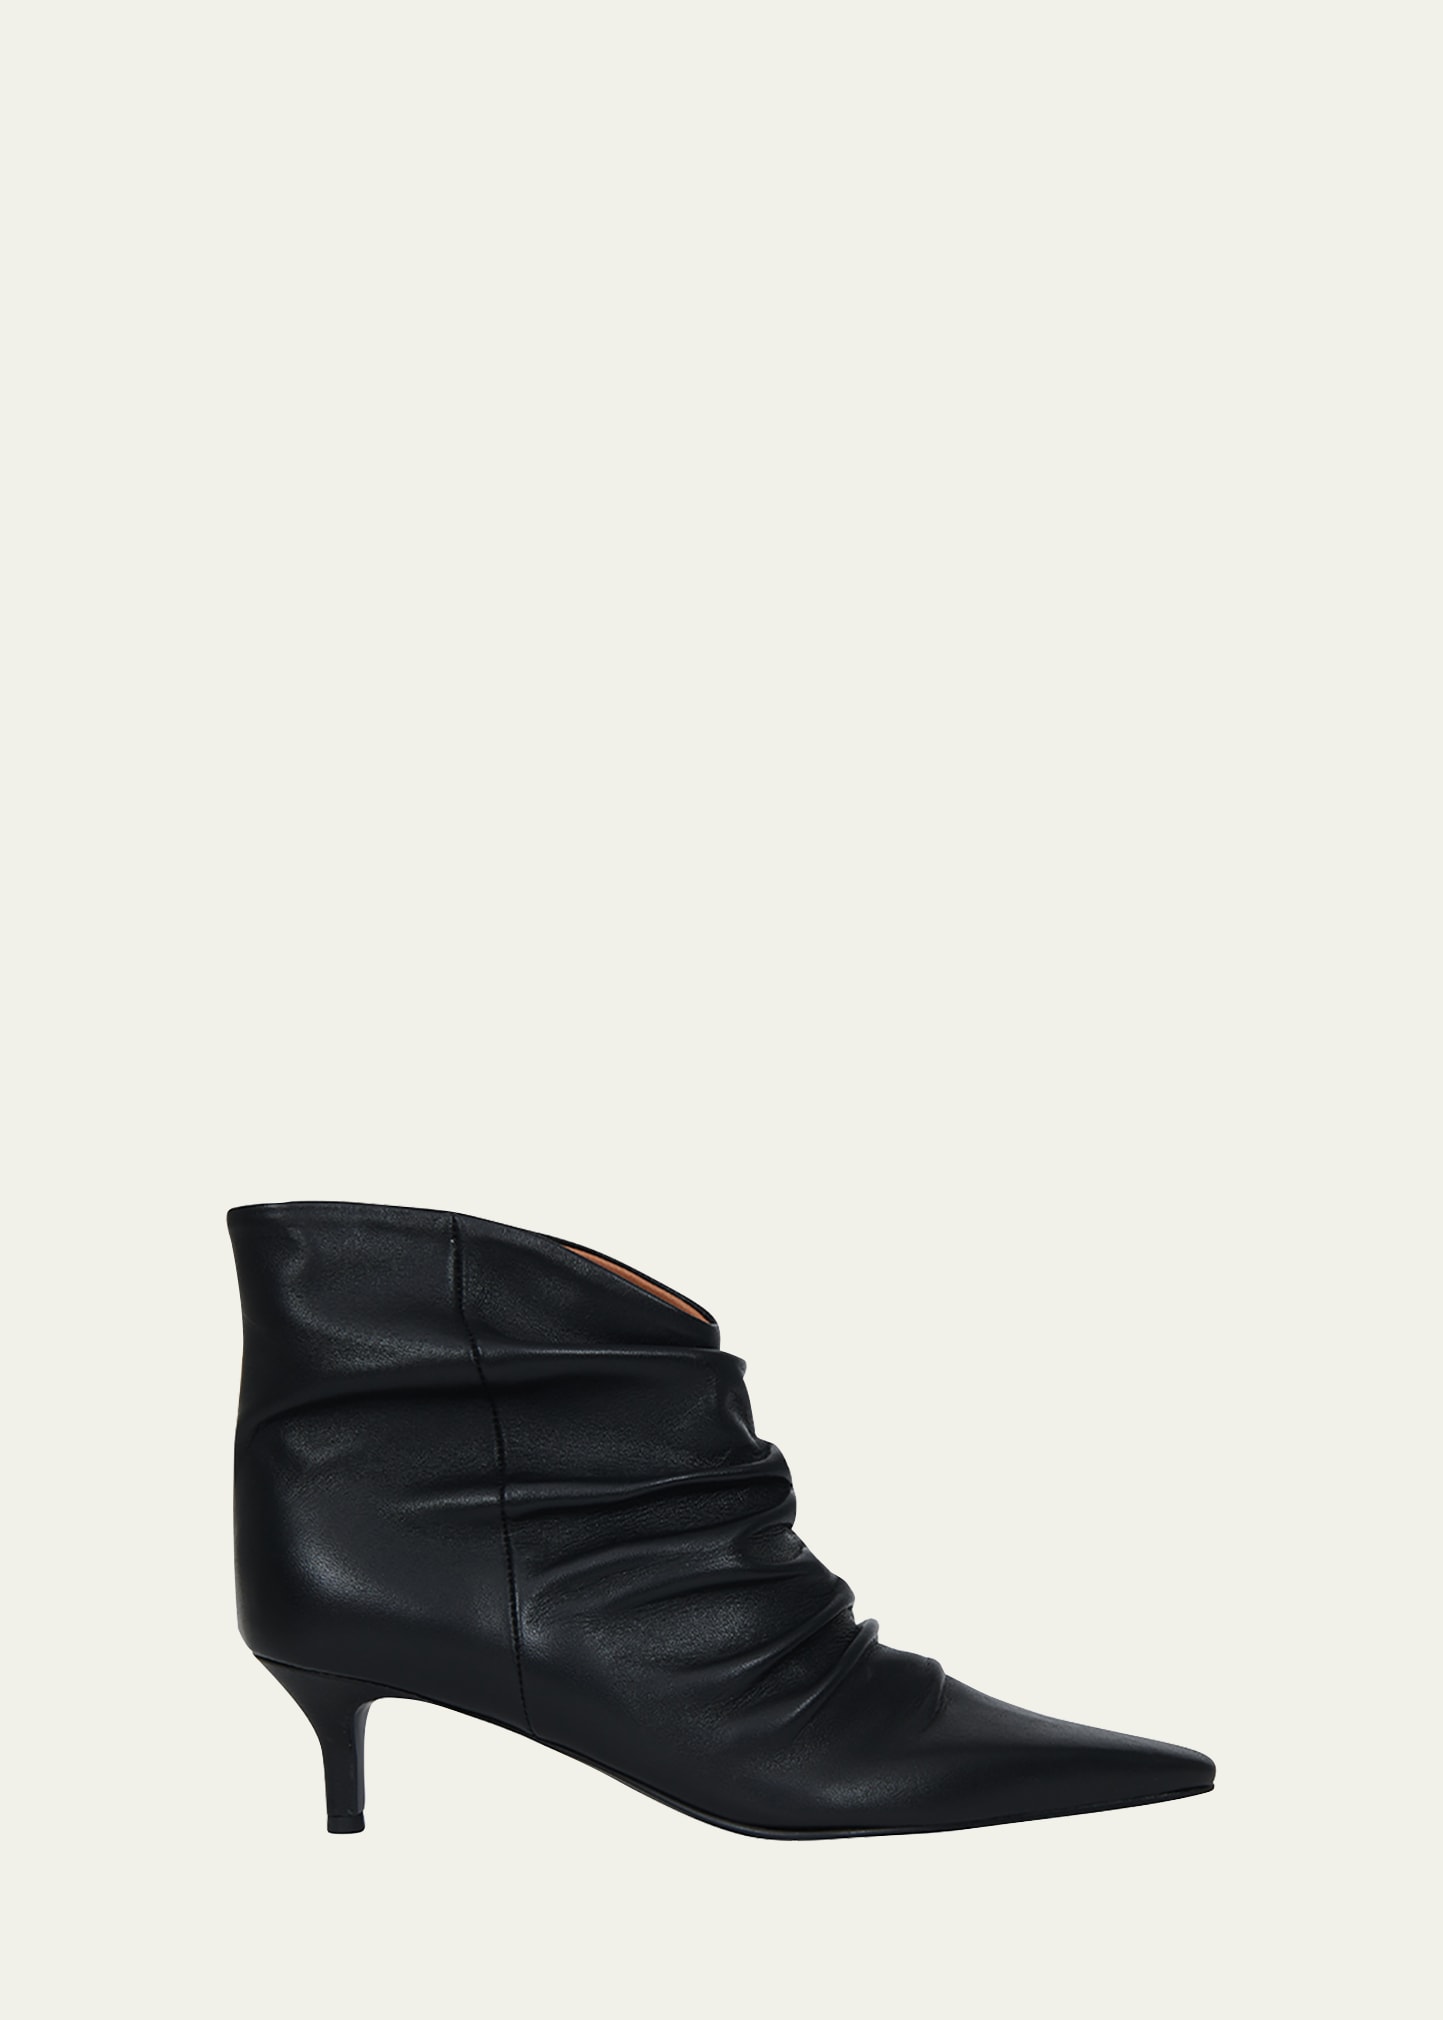 REIKE NEN SLOUCHY LEATHER ANKLE BOOTIES